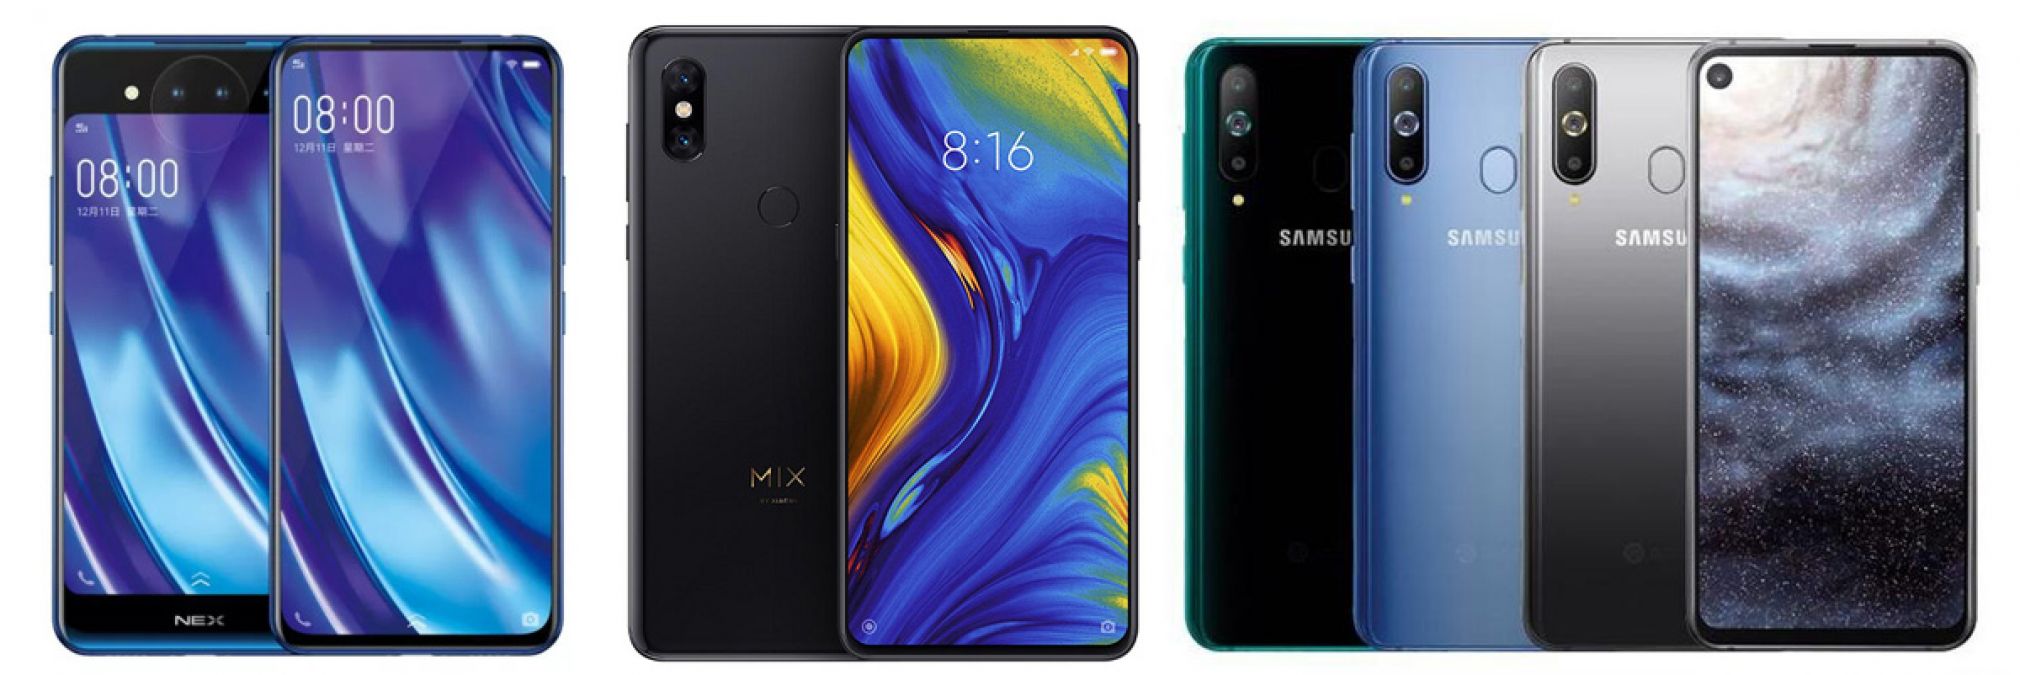 This smartphone also defeats Xiaomi and Vivo in global 5G market